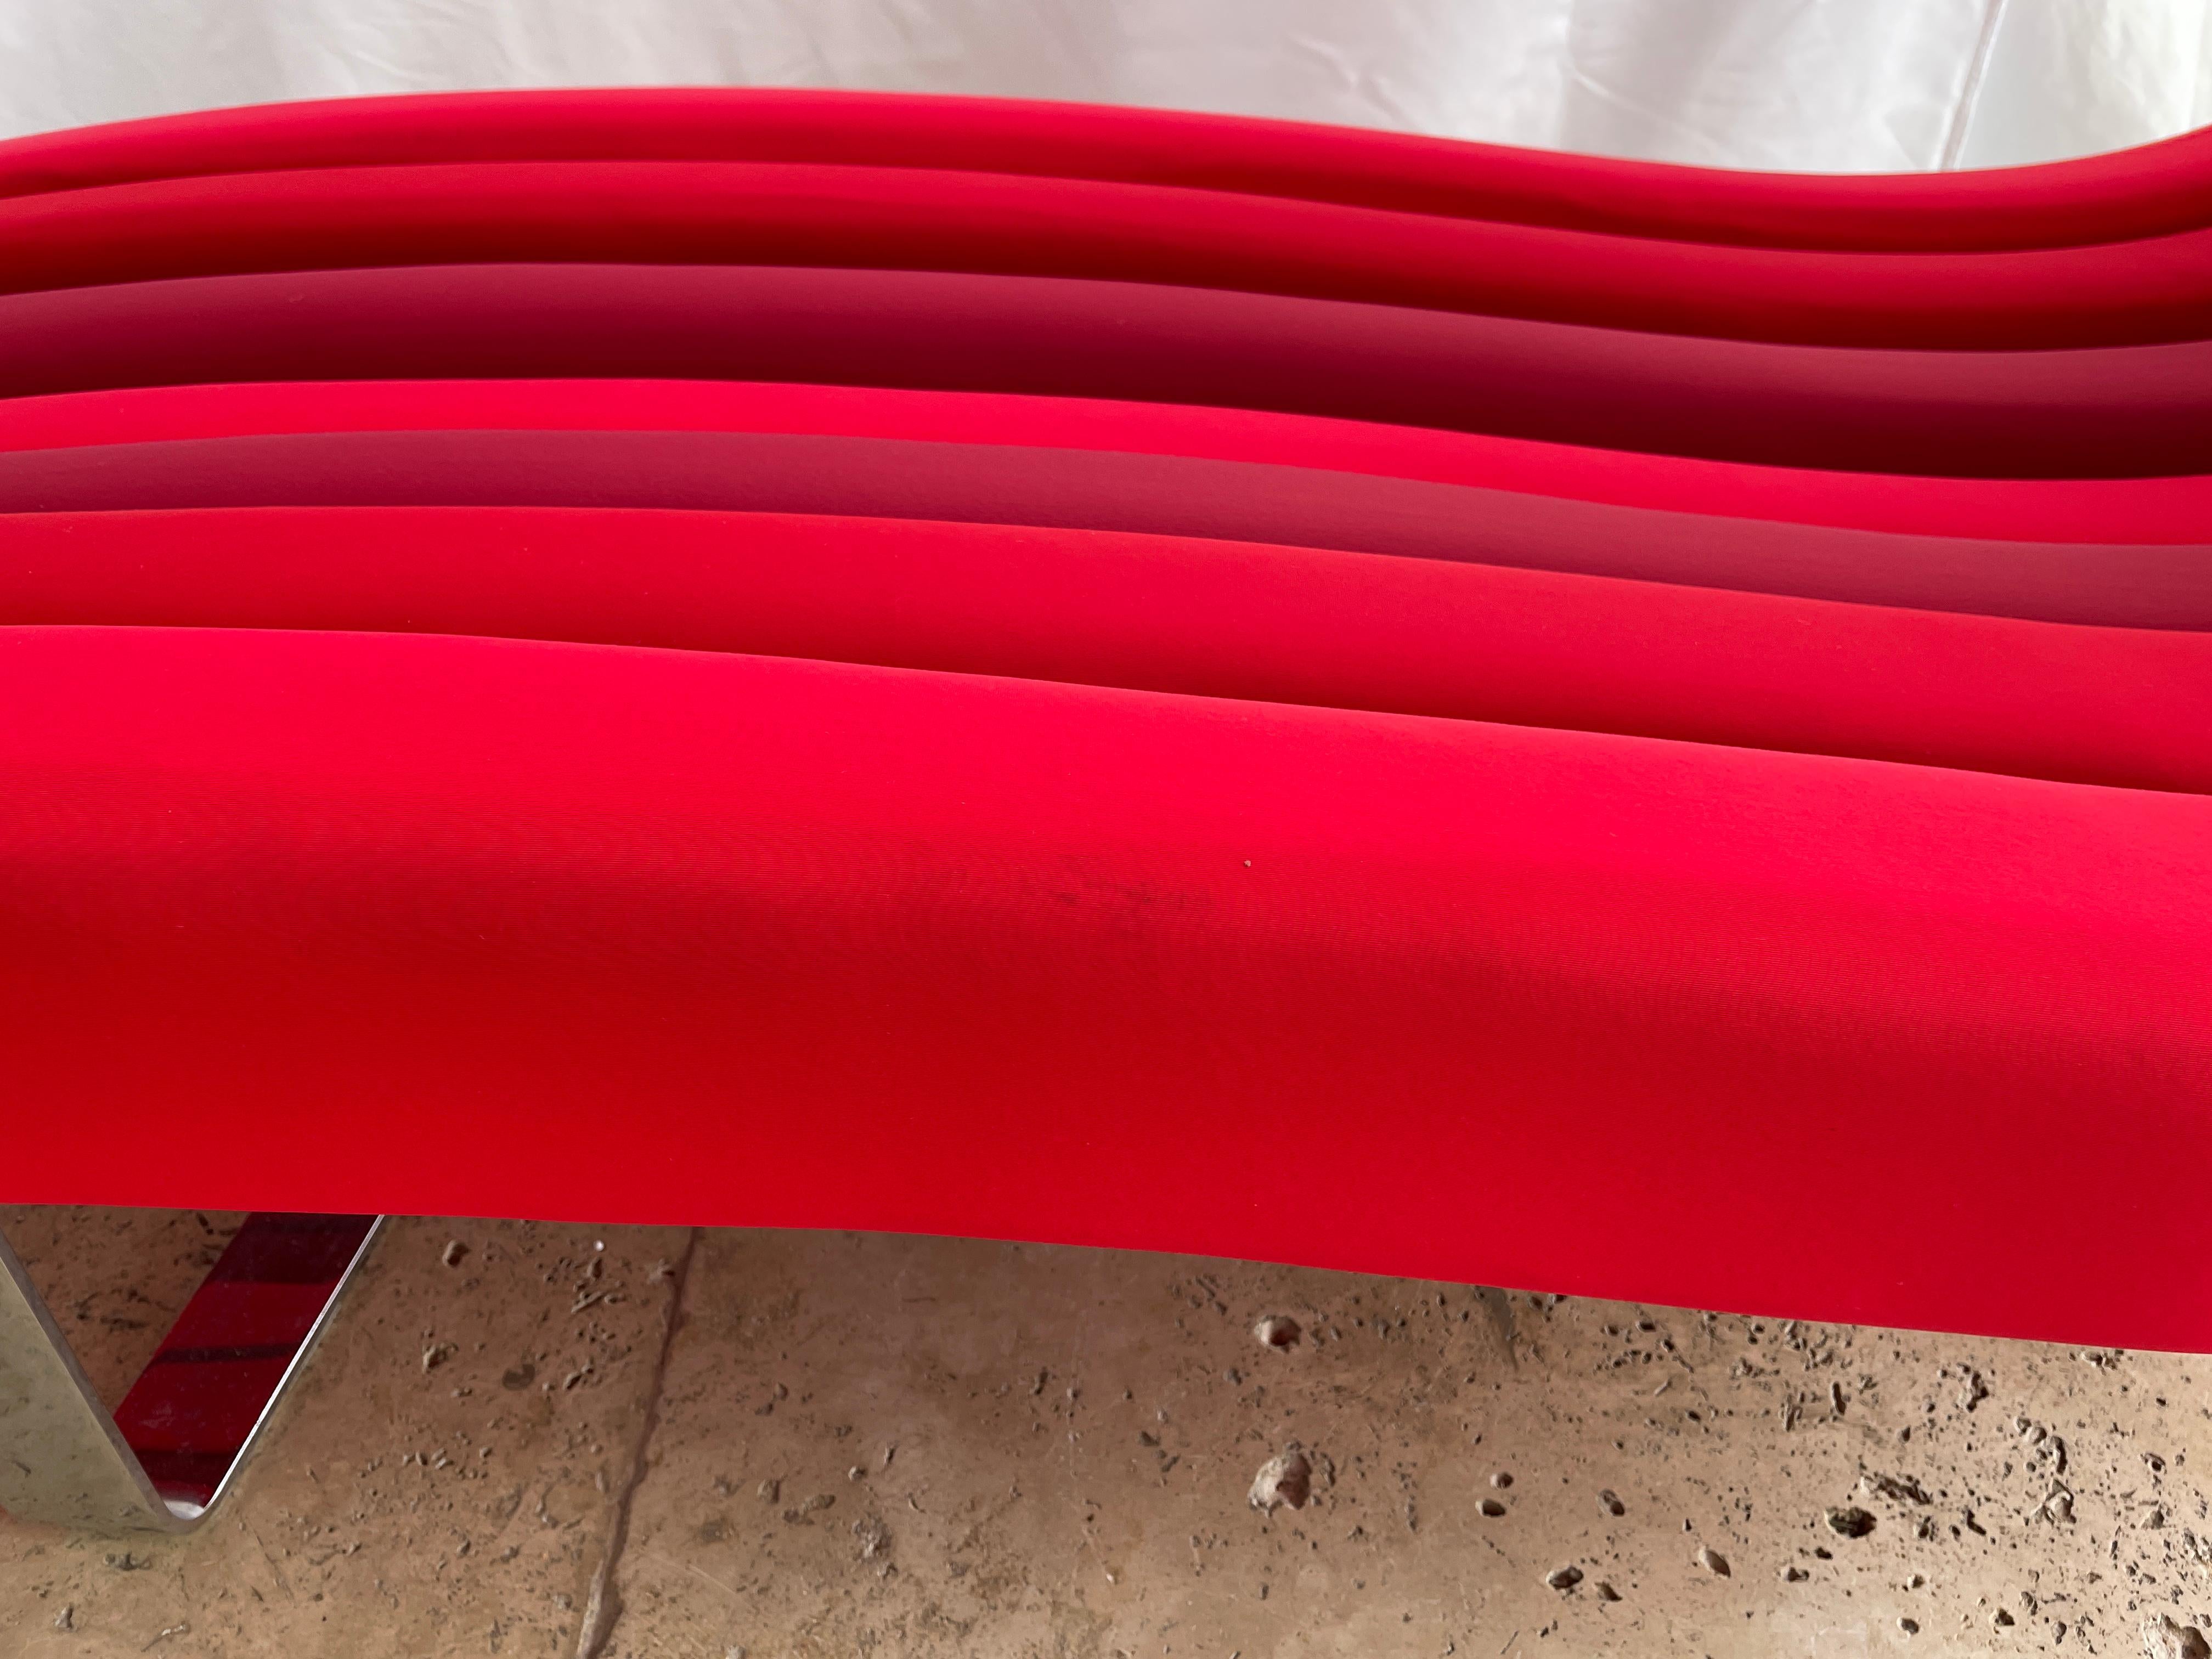 Vitamine Chaise Longues by Roche Bobois, France 7